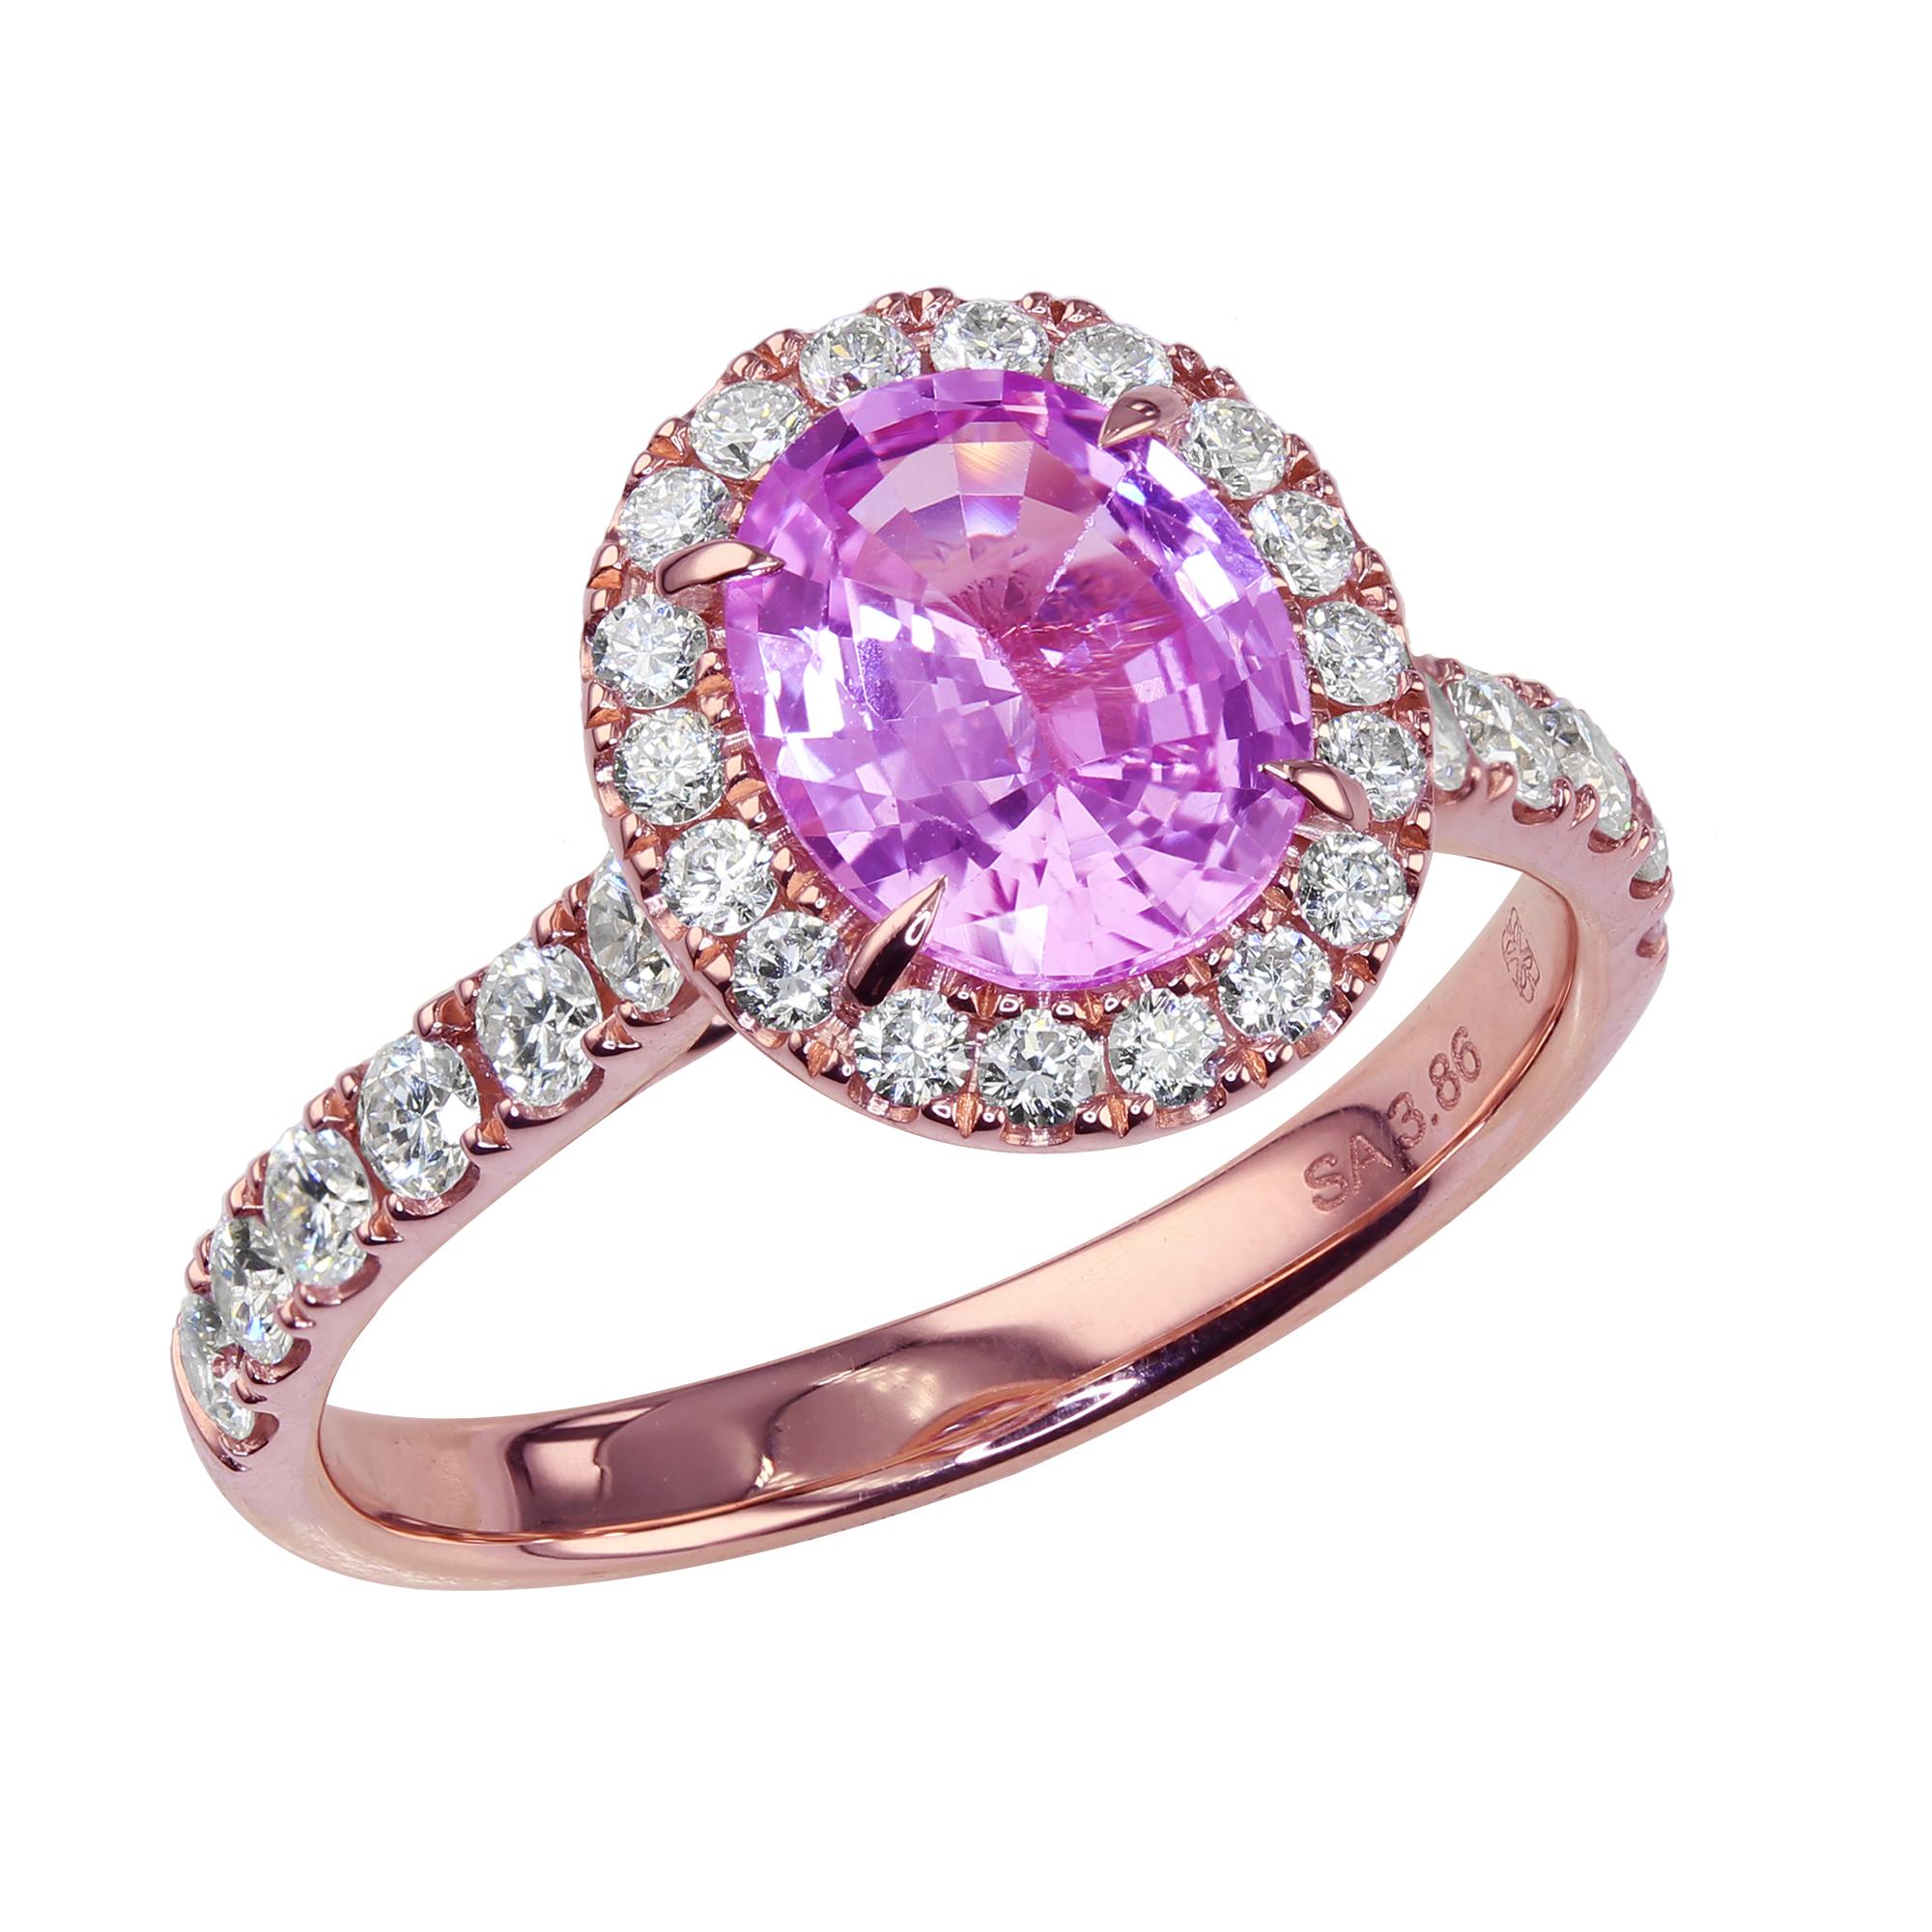 1.57 Carat Pink Sapphire Cocktail Ring set in 18K Rose Gold For Sale